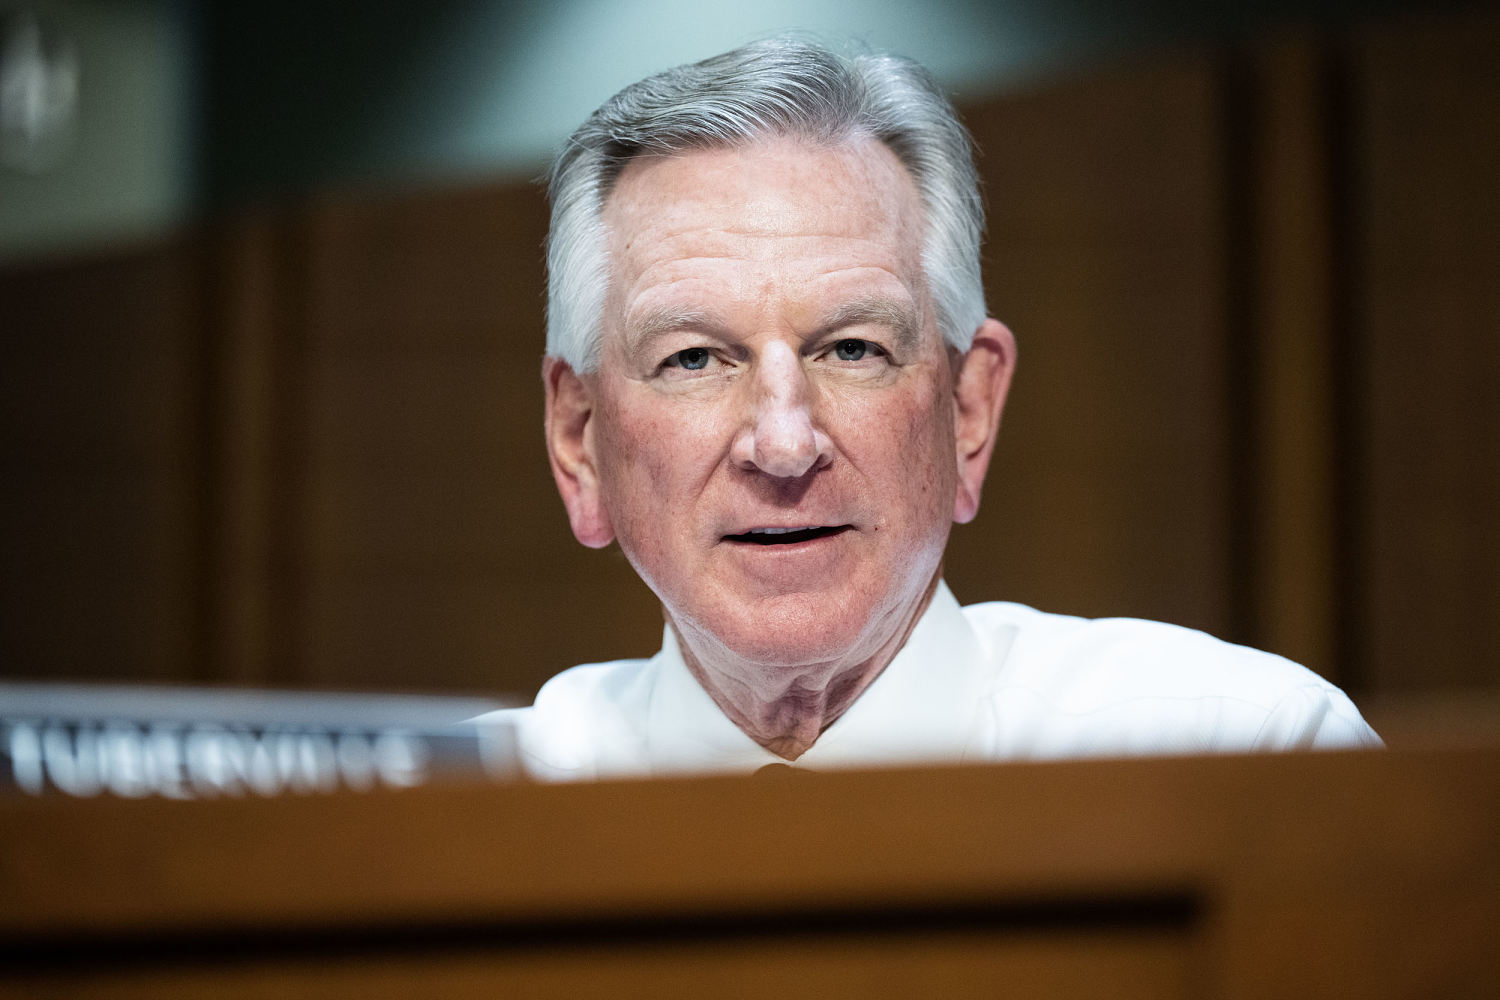 Tuberville picks a fight over unemployment that the GOP can’t win